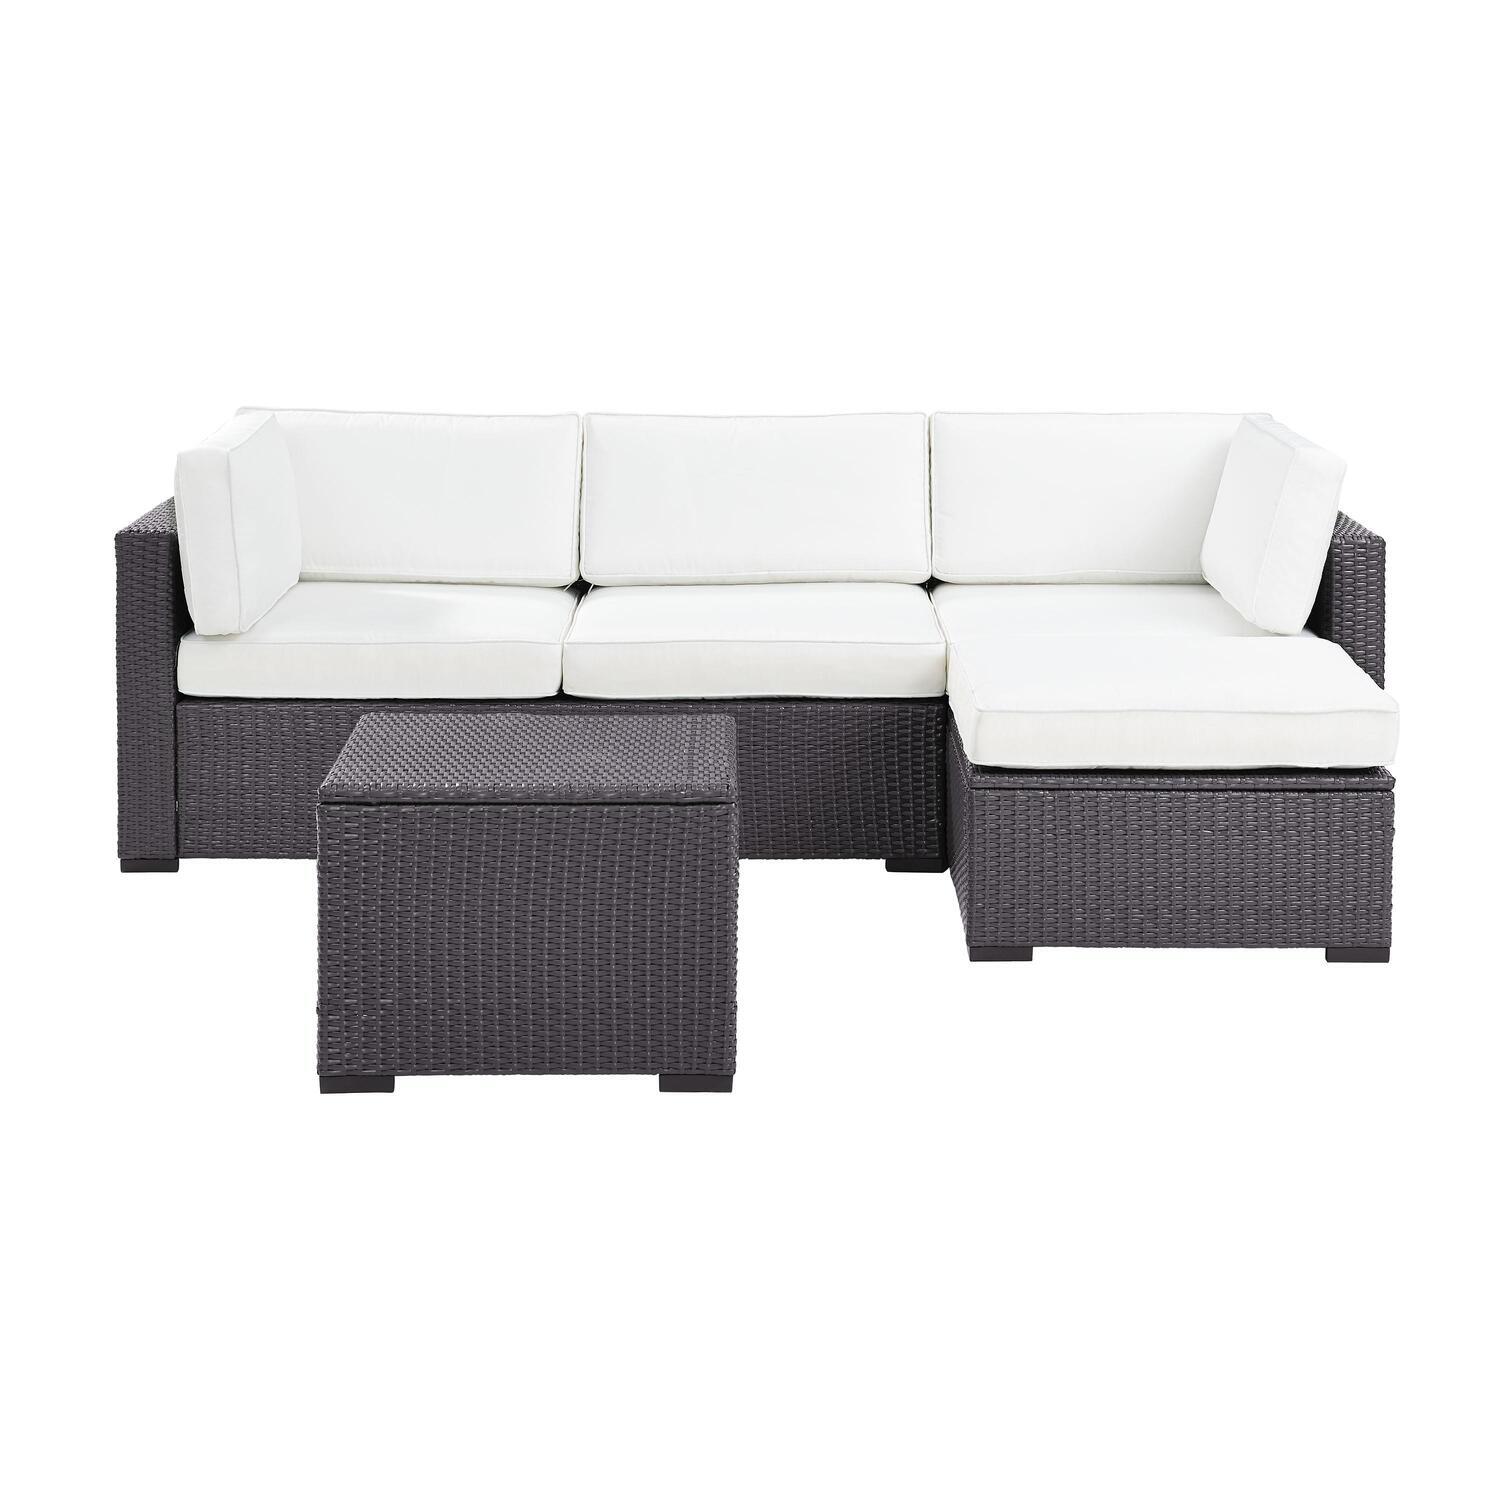 Crosley Furniture Biscayne 4 Piece Metal Patio Sectional Set in Brown/White - image 1 of 4